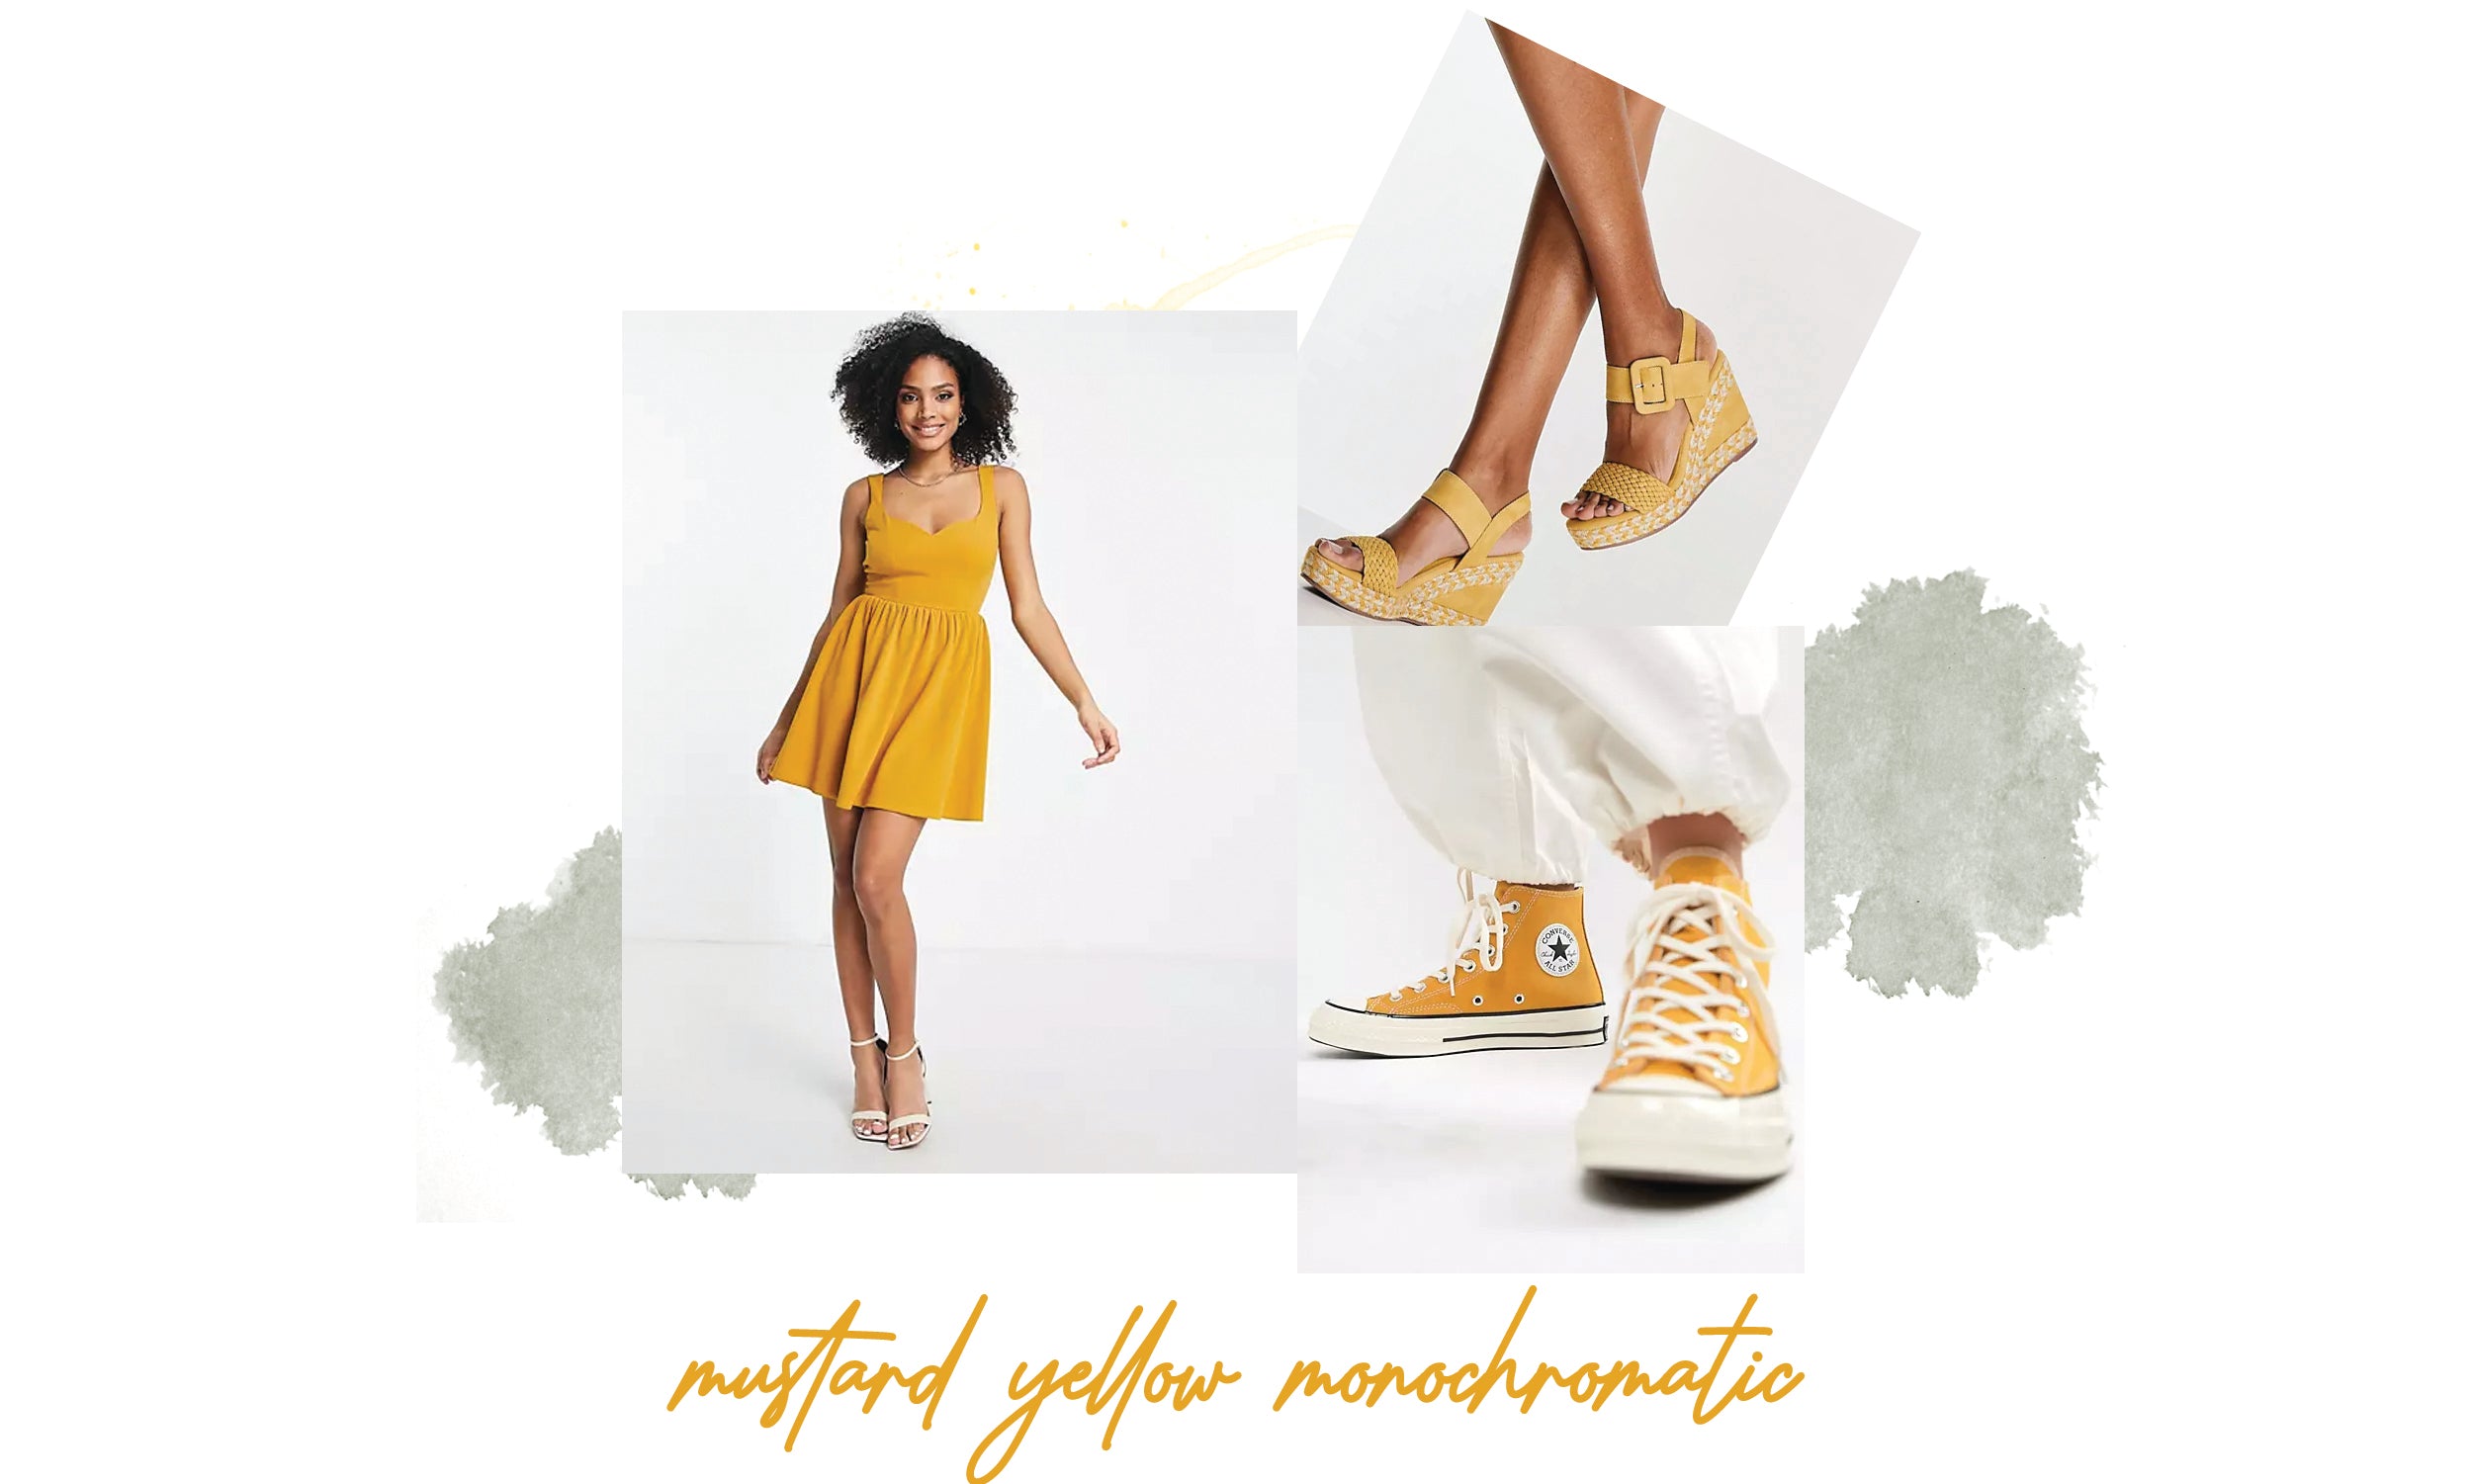 a detailed collage image showing a pair of yellow converse trainers (hightops), pumps and a short summer dress - all in different shades of yellow.